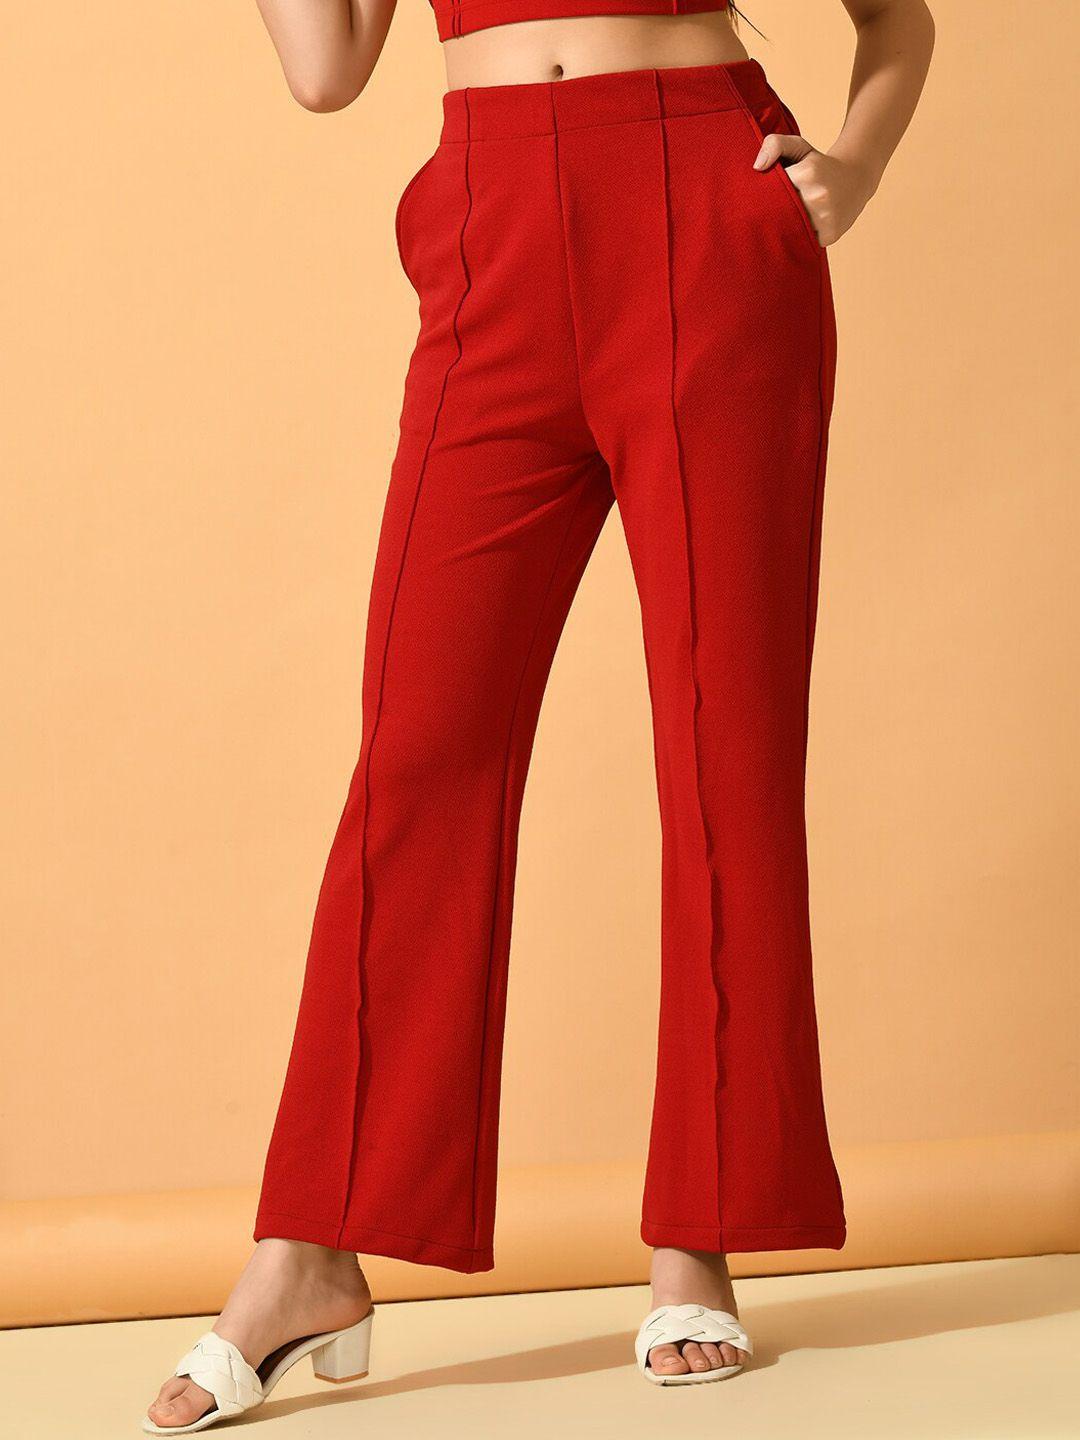 dressberry red crop top with trousers co-ords